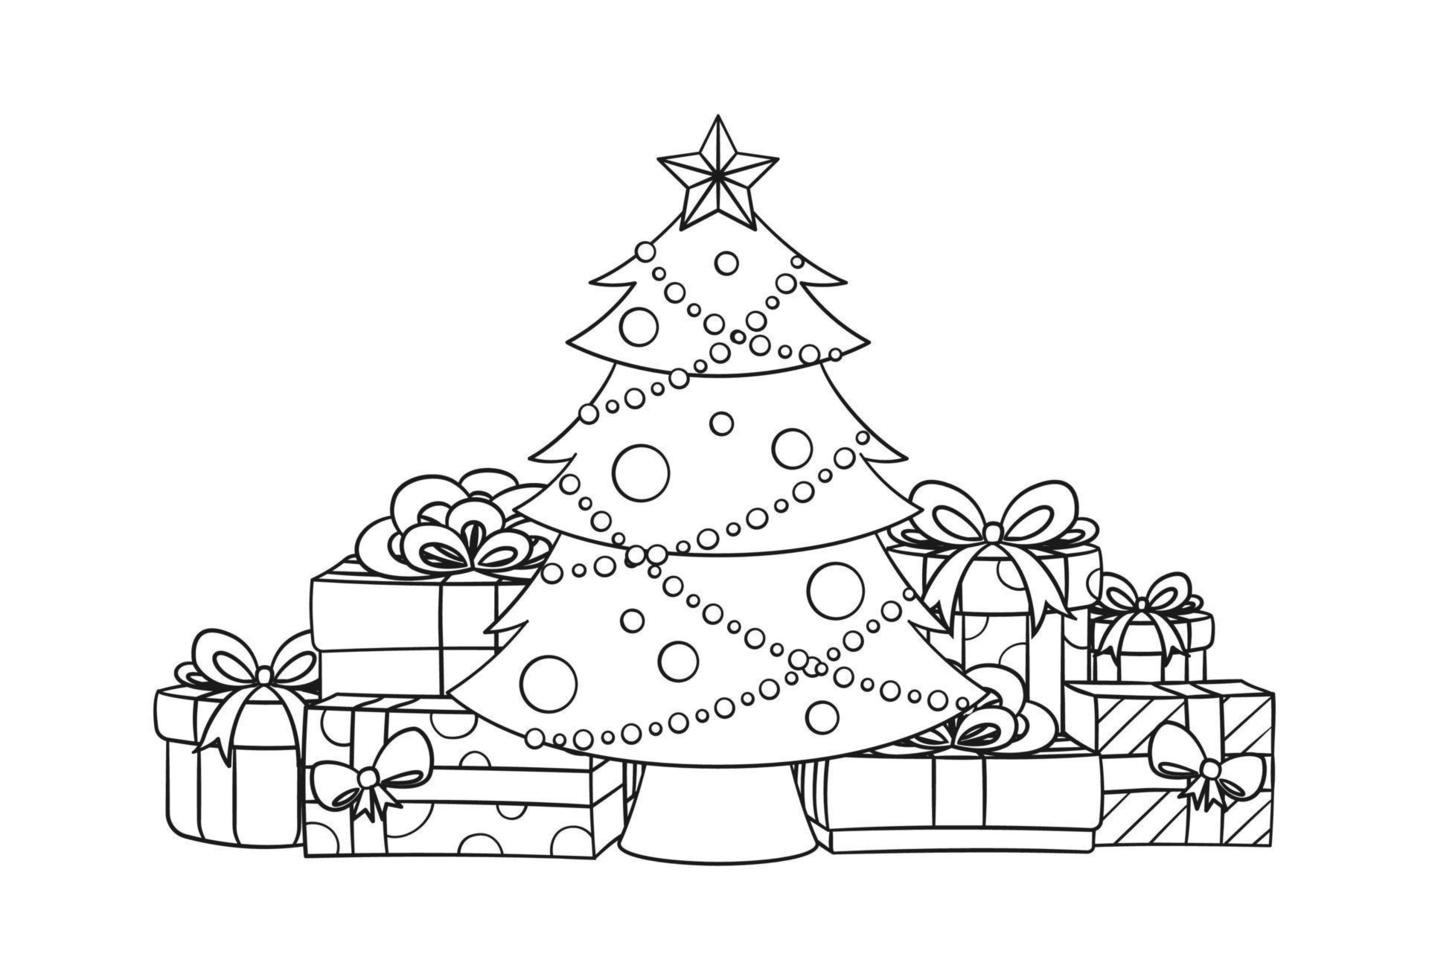 Christmas tree with fairy lights, ornaments and golden star surrounded by colorful presents and gift boxes cartoon outline illustration. Coloring book page printable activity worksheet for kids. vector